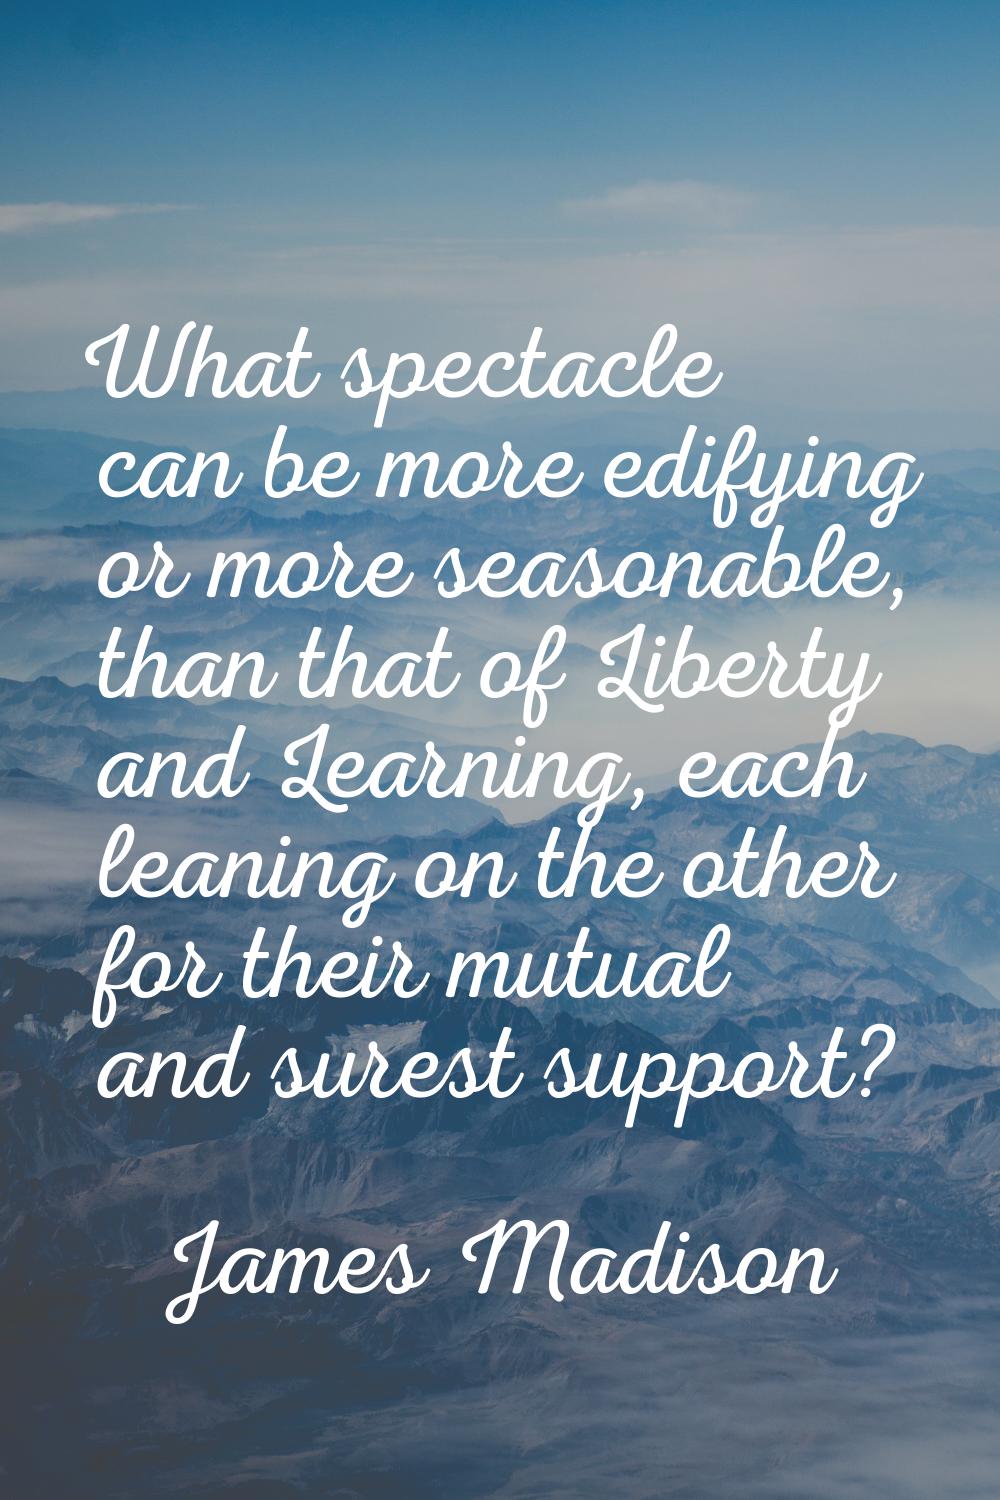 What spectacle can be more edifying or more seasonable, than that of Liberty and Learning, each lea